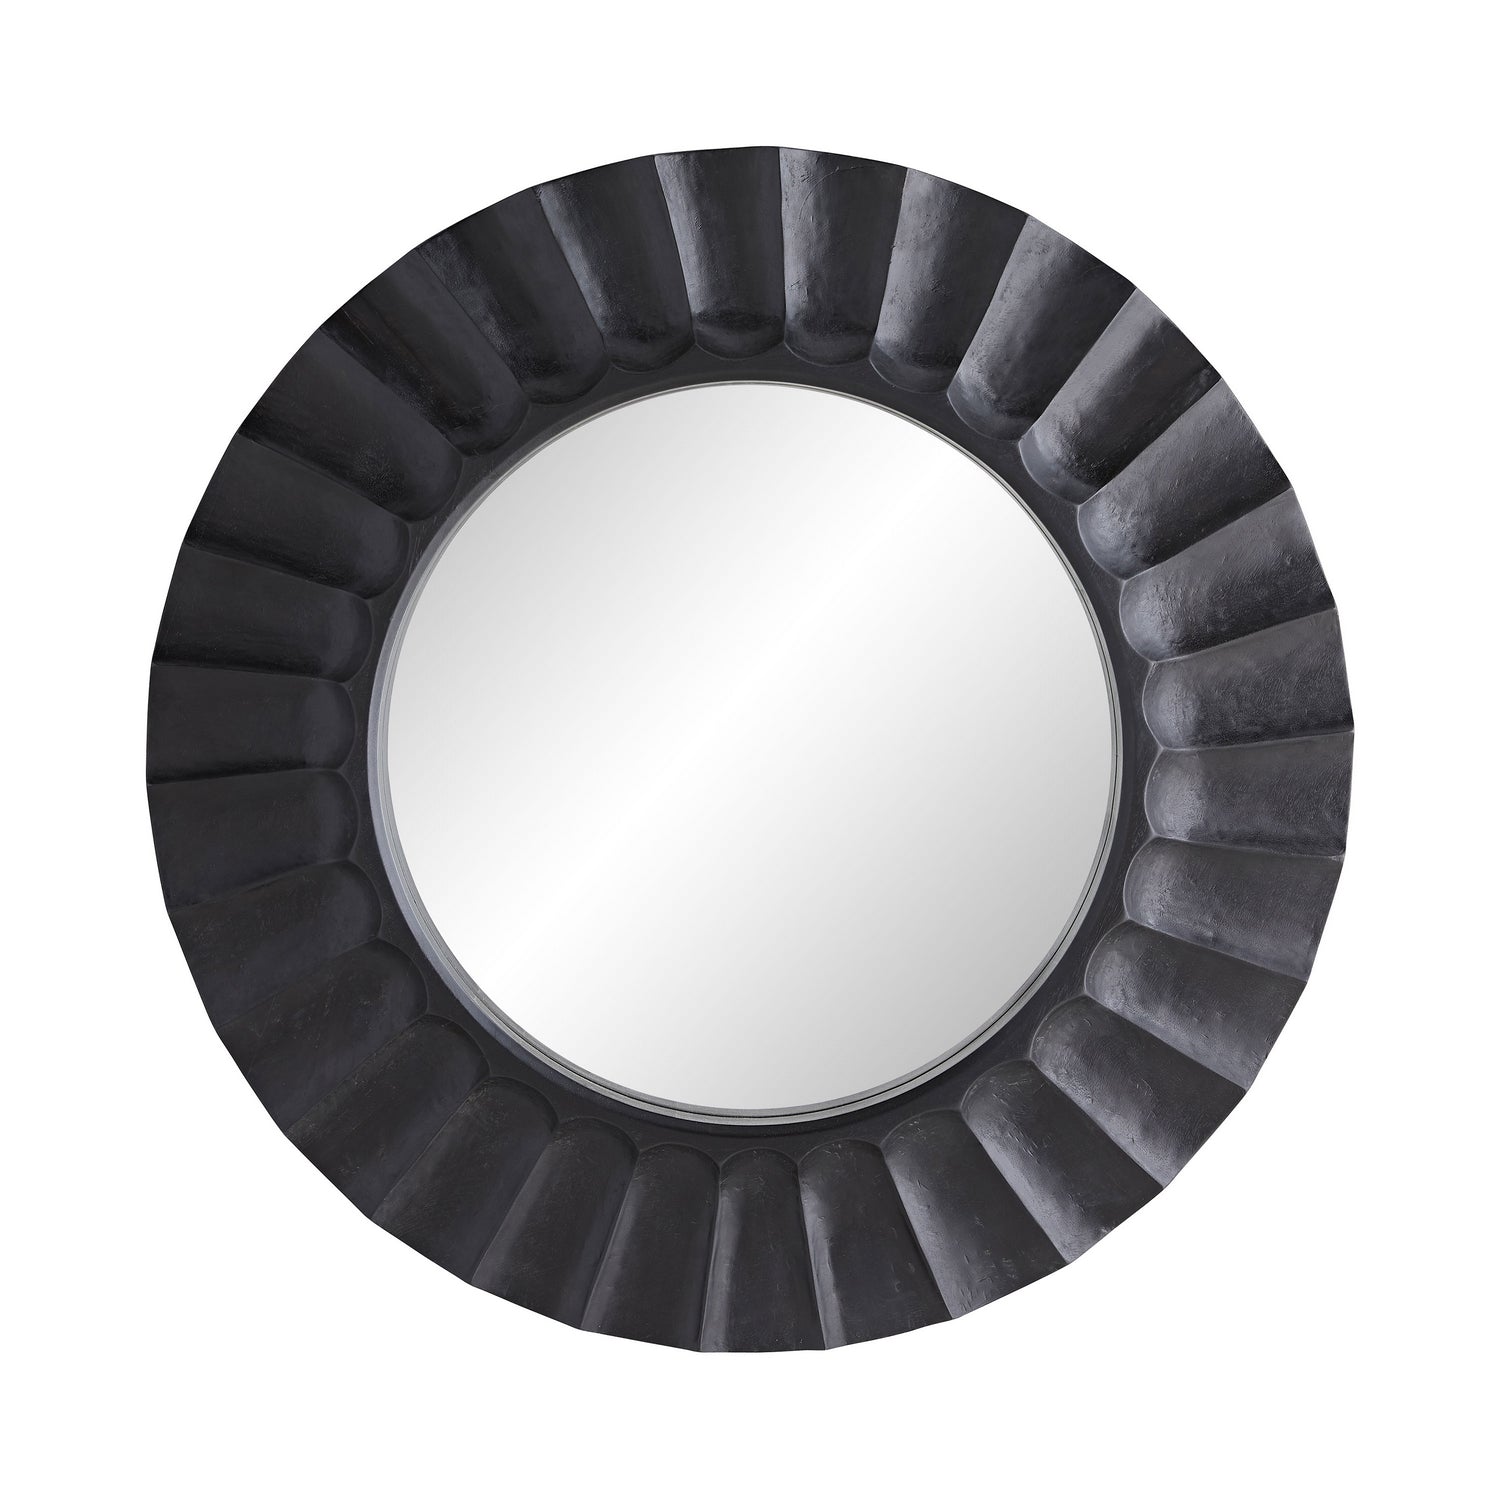 Mirror from the Blake collection in Black Wax finish